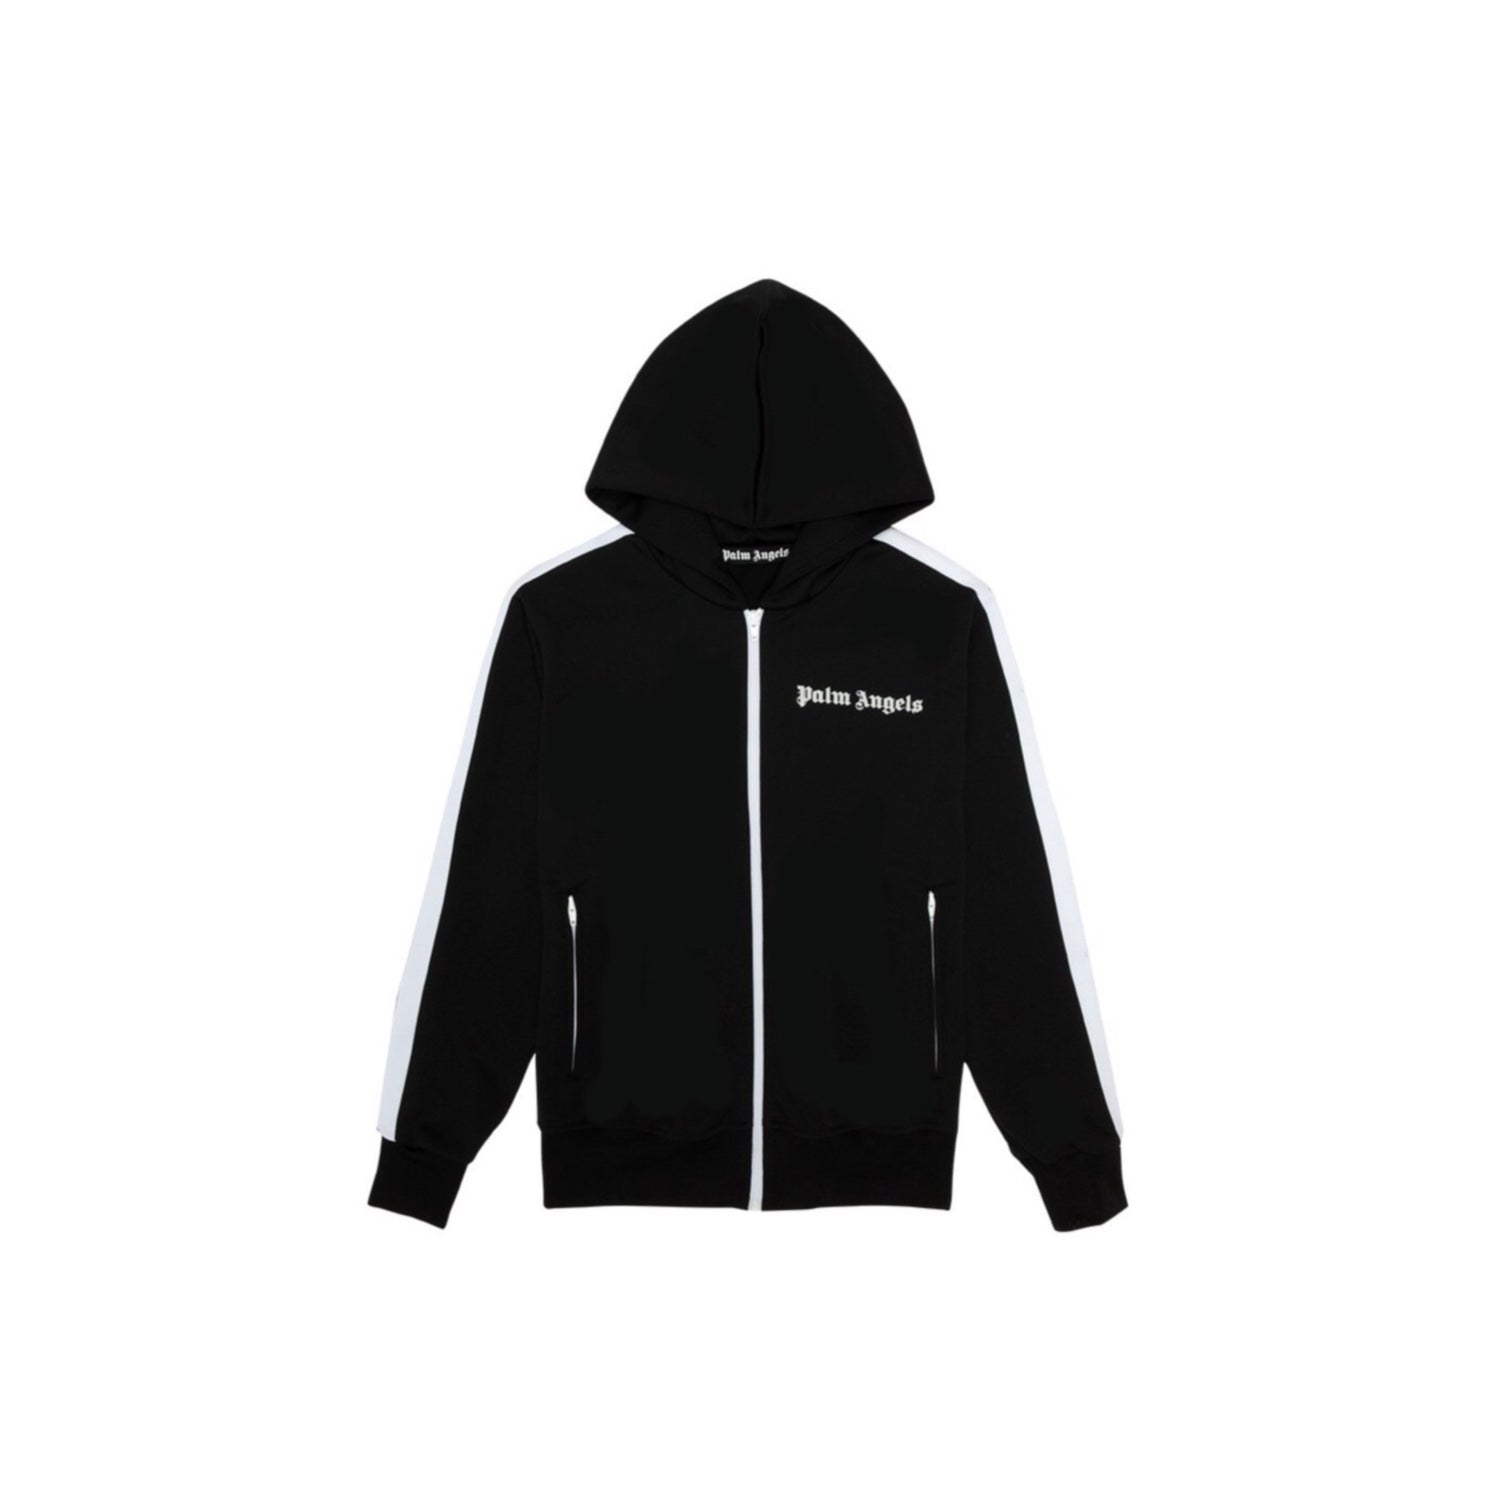 Palm Angels Hooded Track Jacket